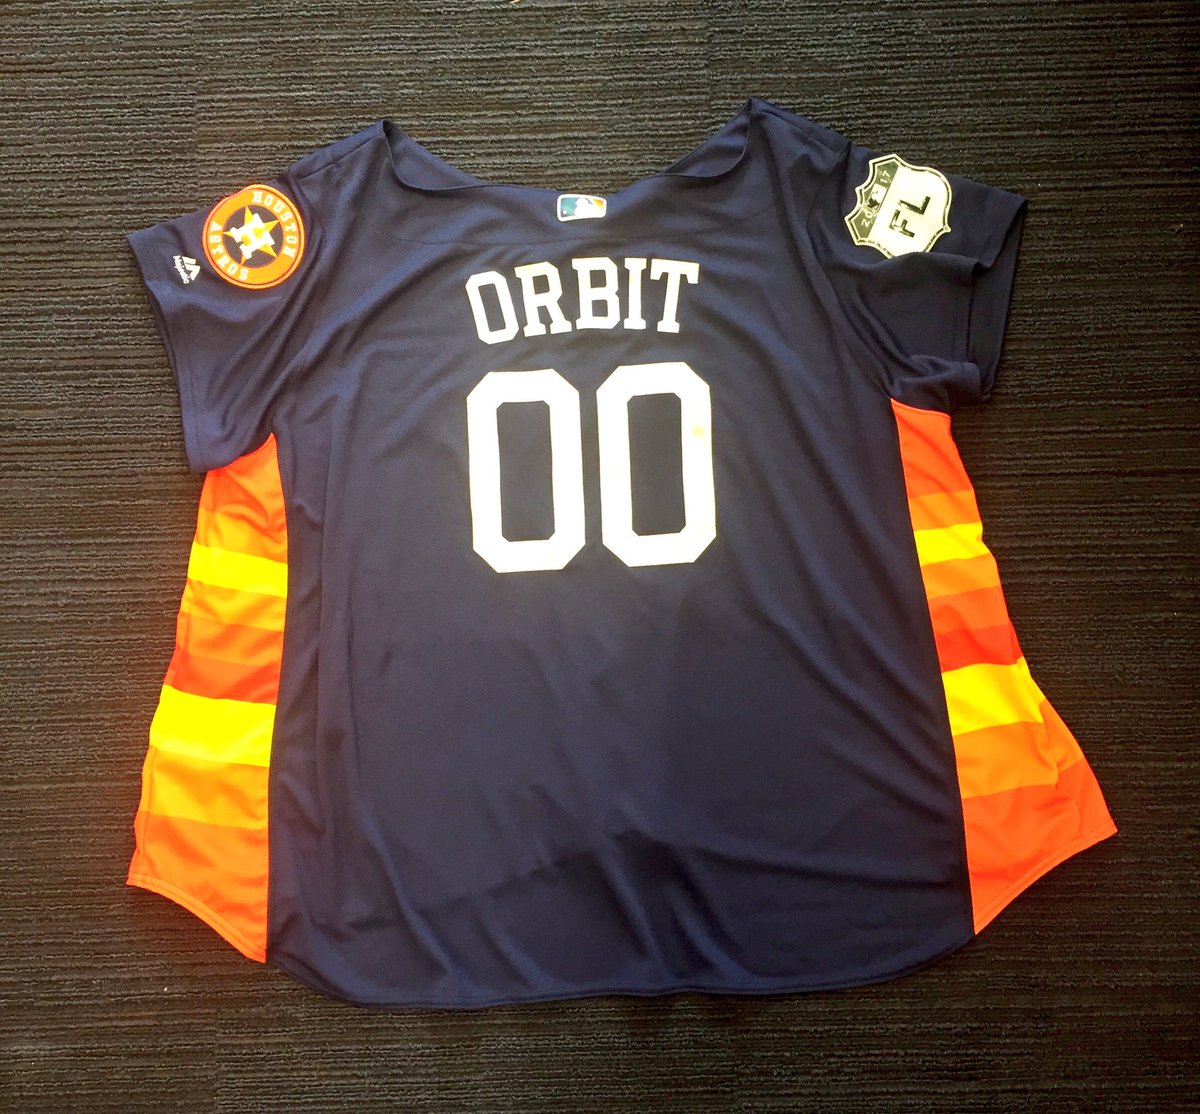 Houston Astros Orbit on X: Shout out to @MajesticOnField for